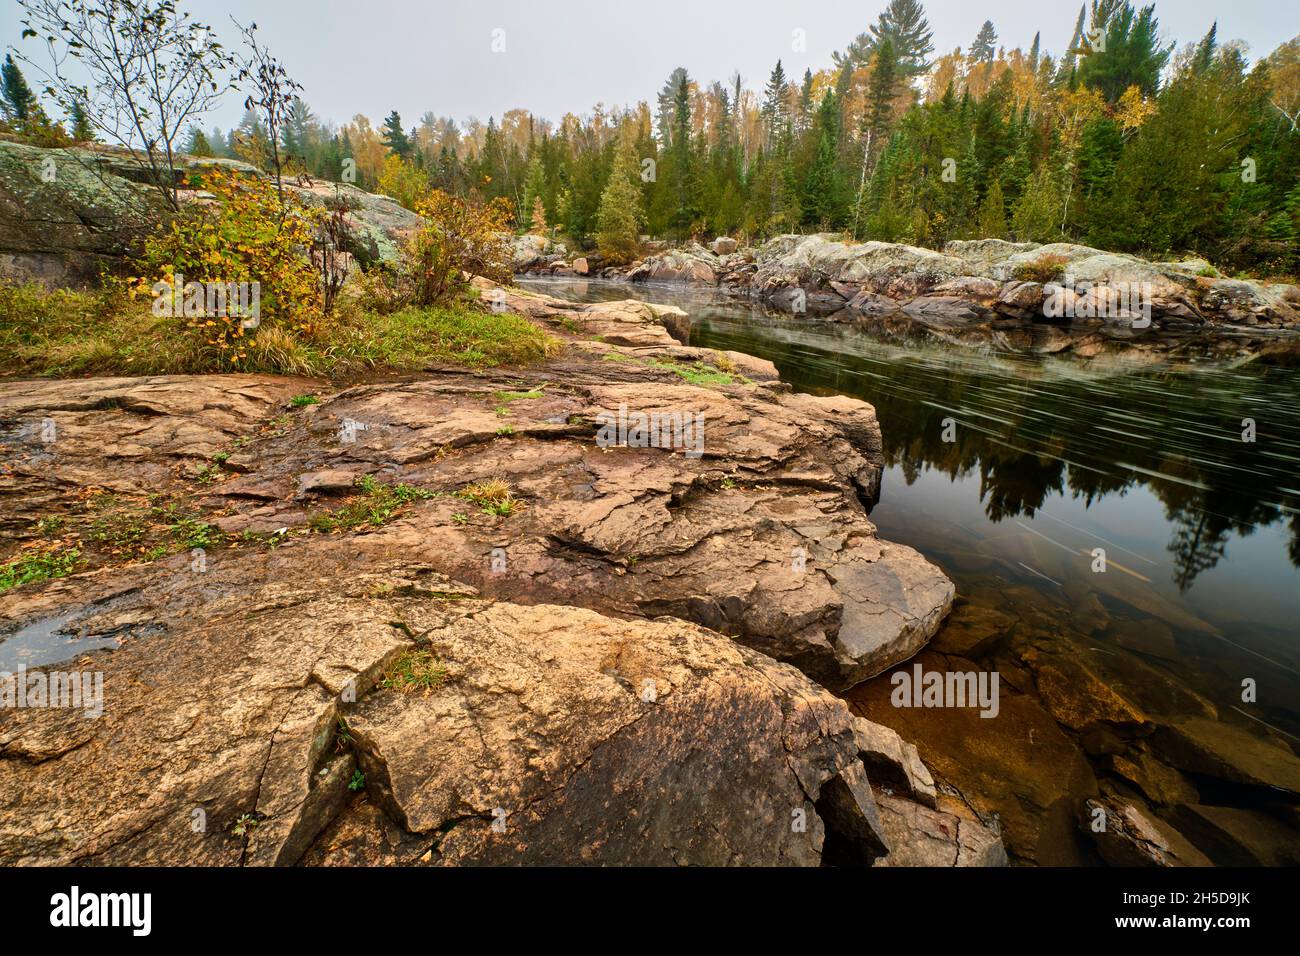 Slow shutterspeed photograph of a river in the Cascades Conservation Area near Thunder Bay Ontario. Stock Photo